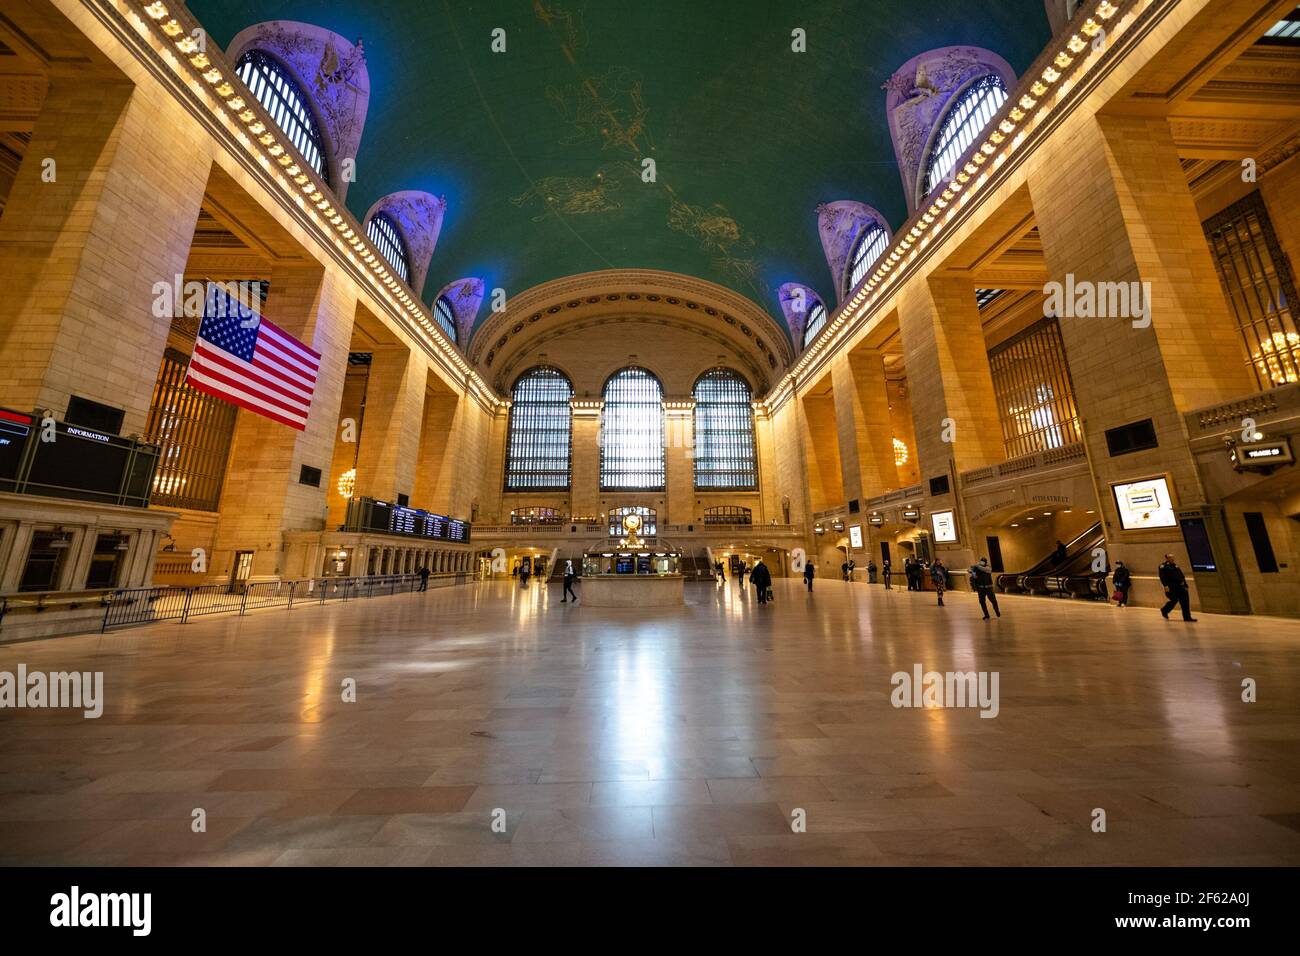 Grand Central Station, Covid-19 Pandemic Stock Photo